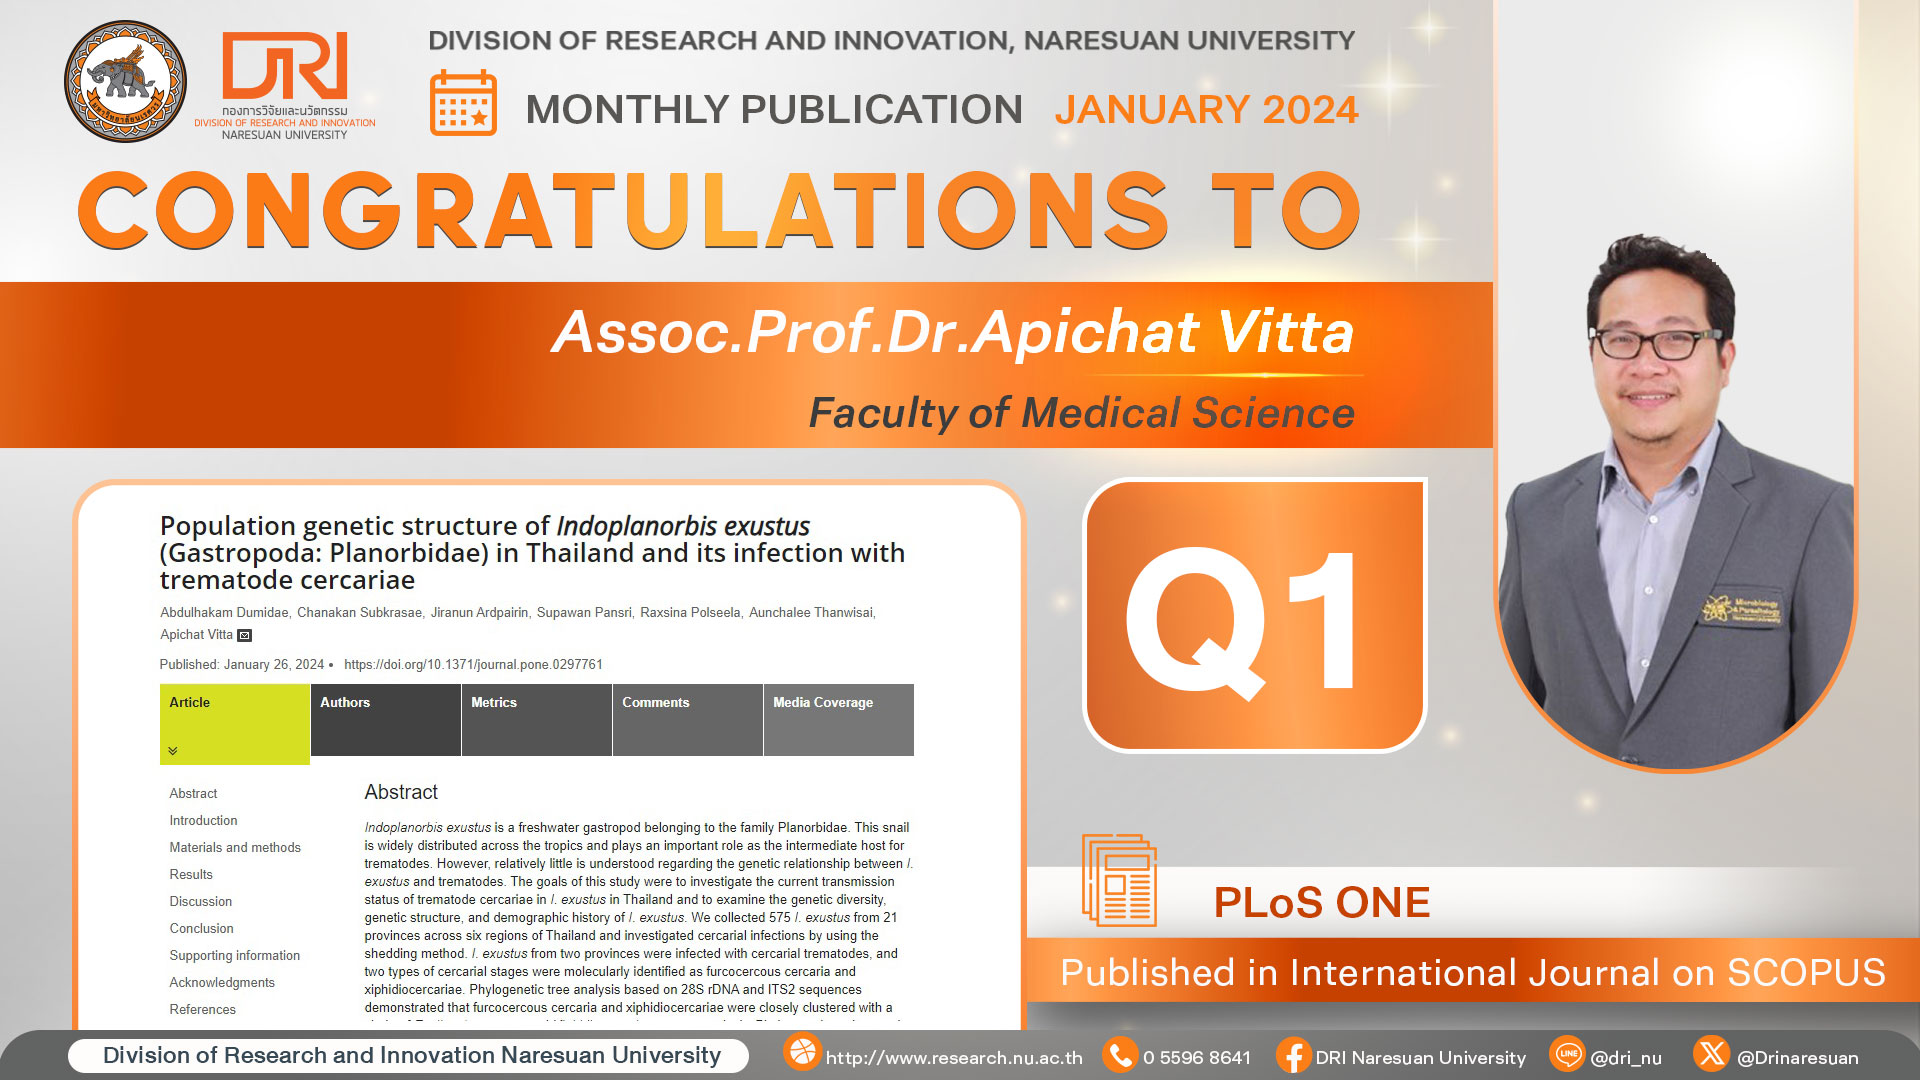 Congratulations to Assoc.Prof.Dr.Apichat Vitta Published in International Journal on SCOPUS